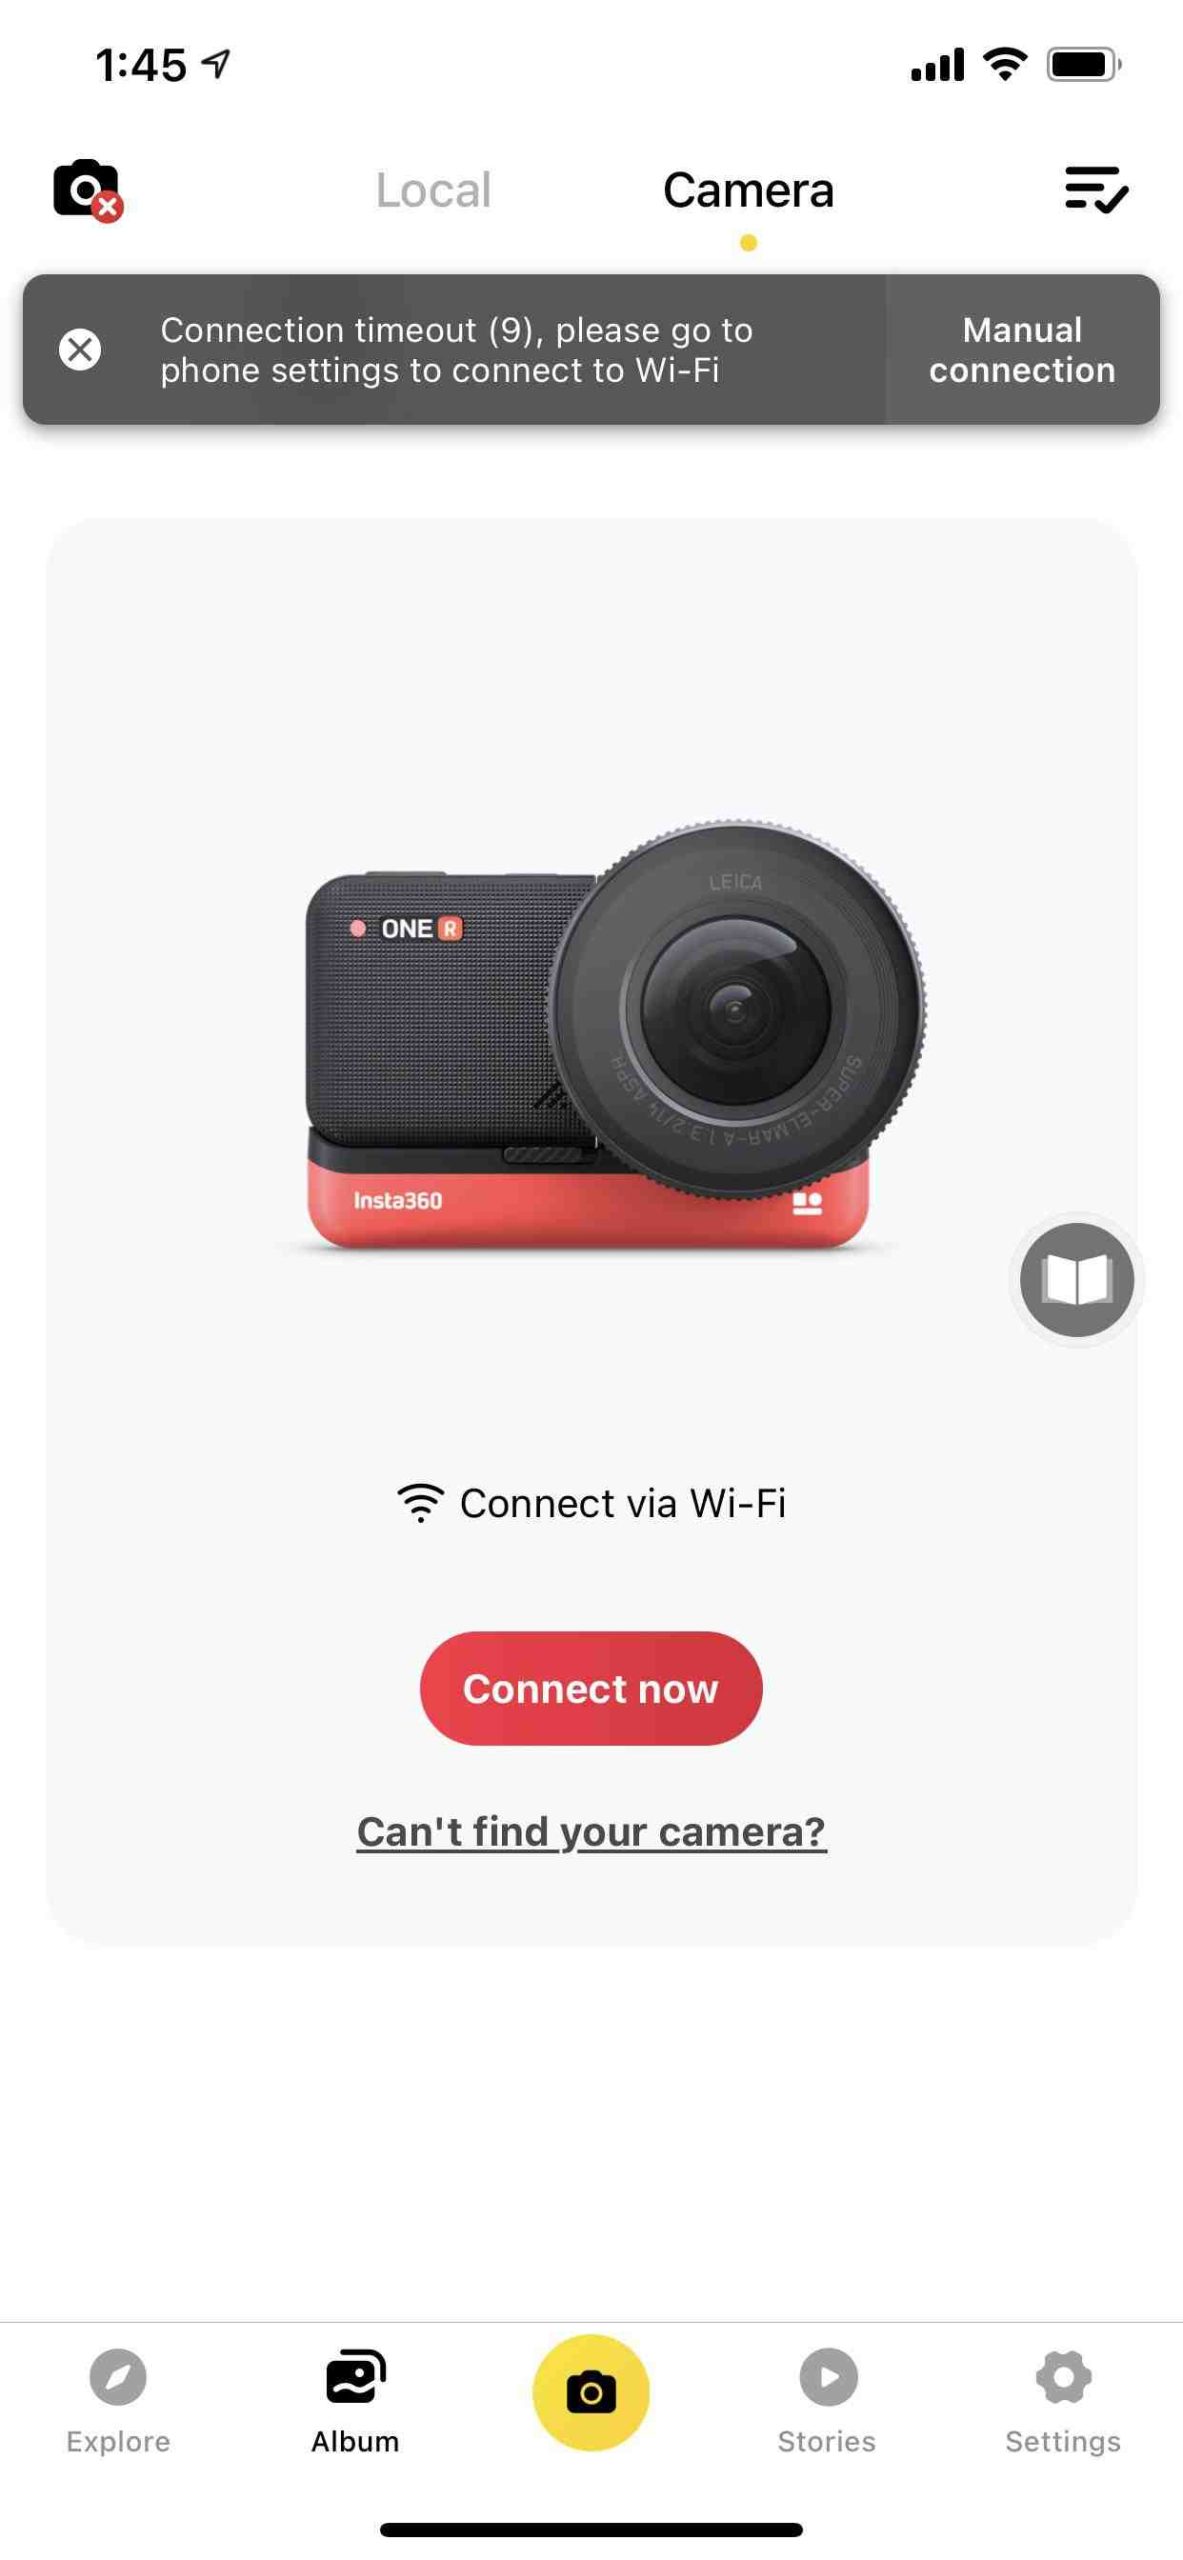 Does Insta 360 have Bluetooth?